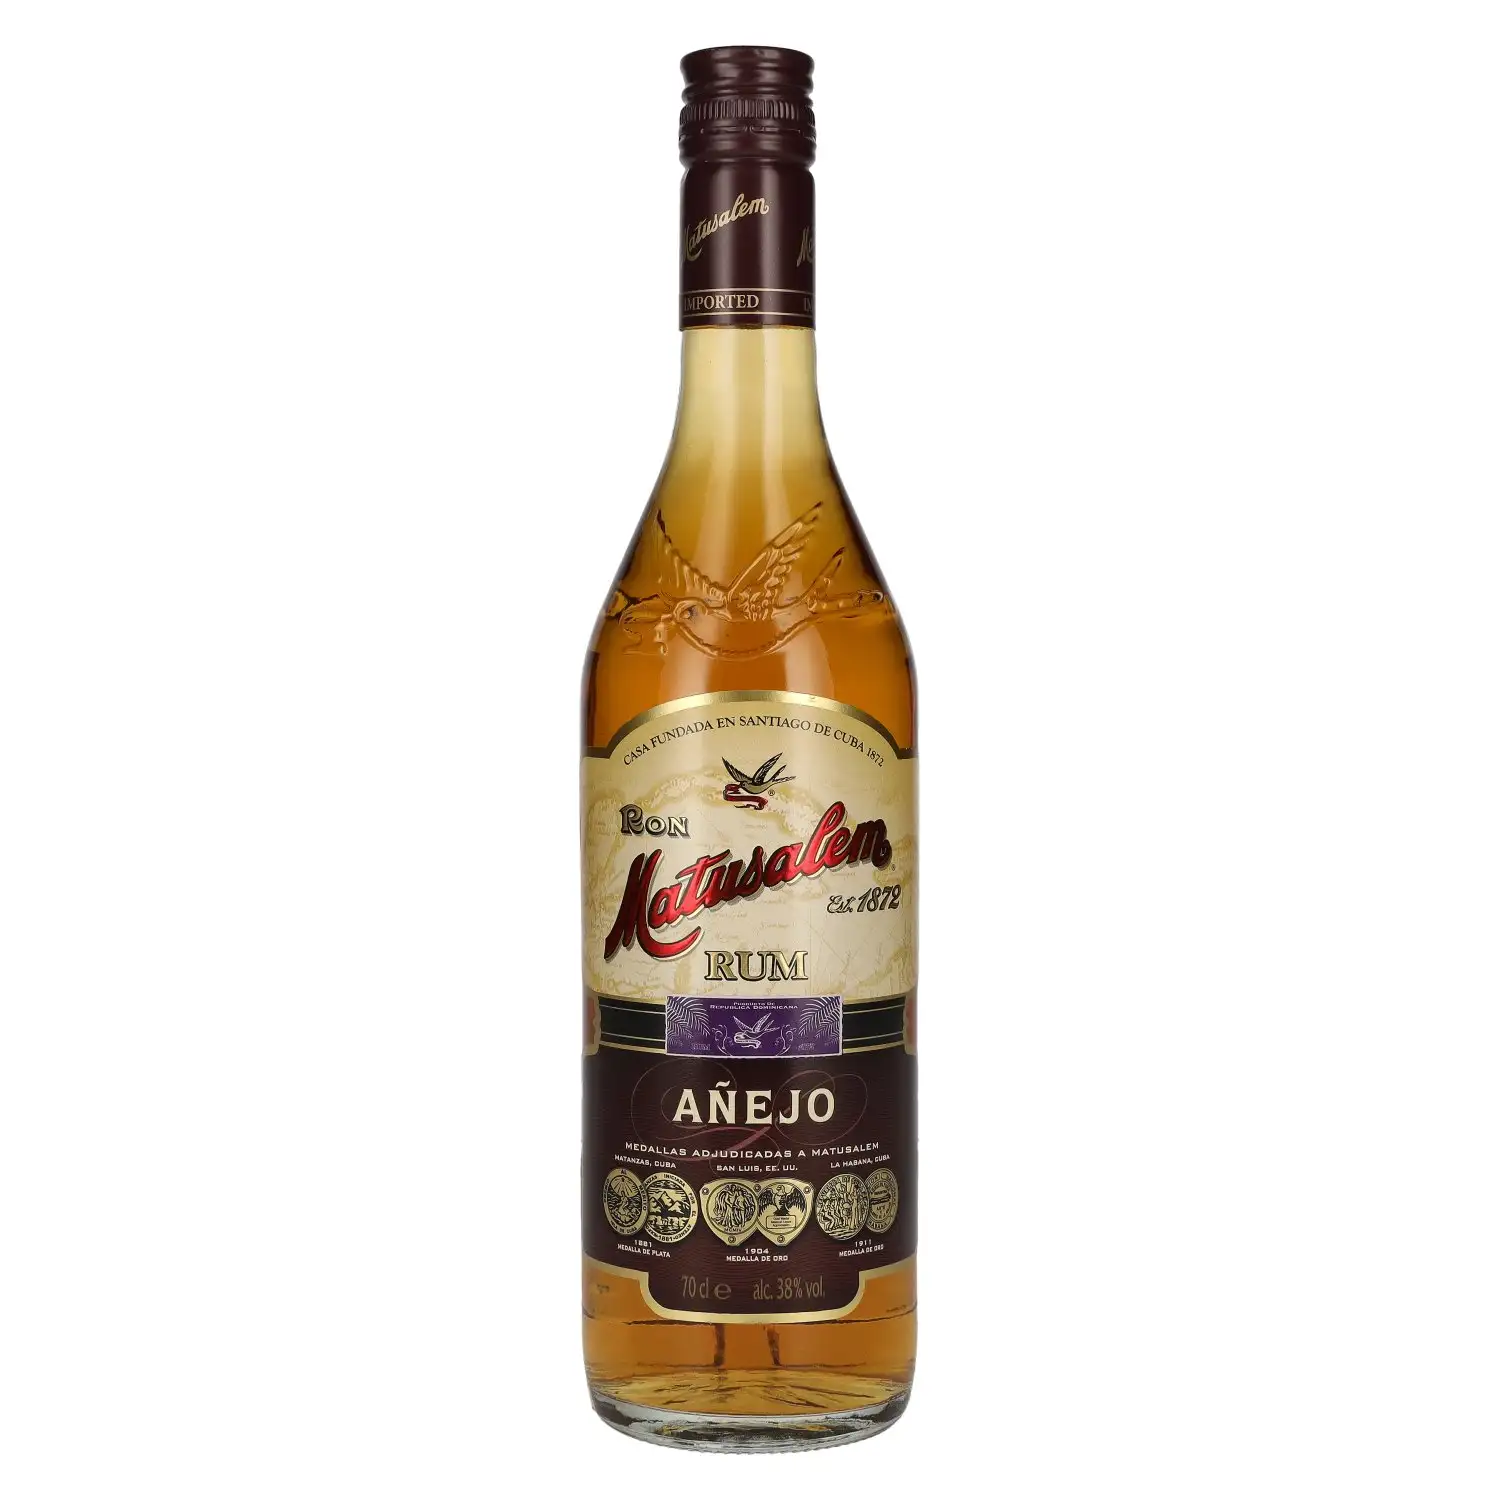 Image of the front of the bottle of the rum Extra Añejo